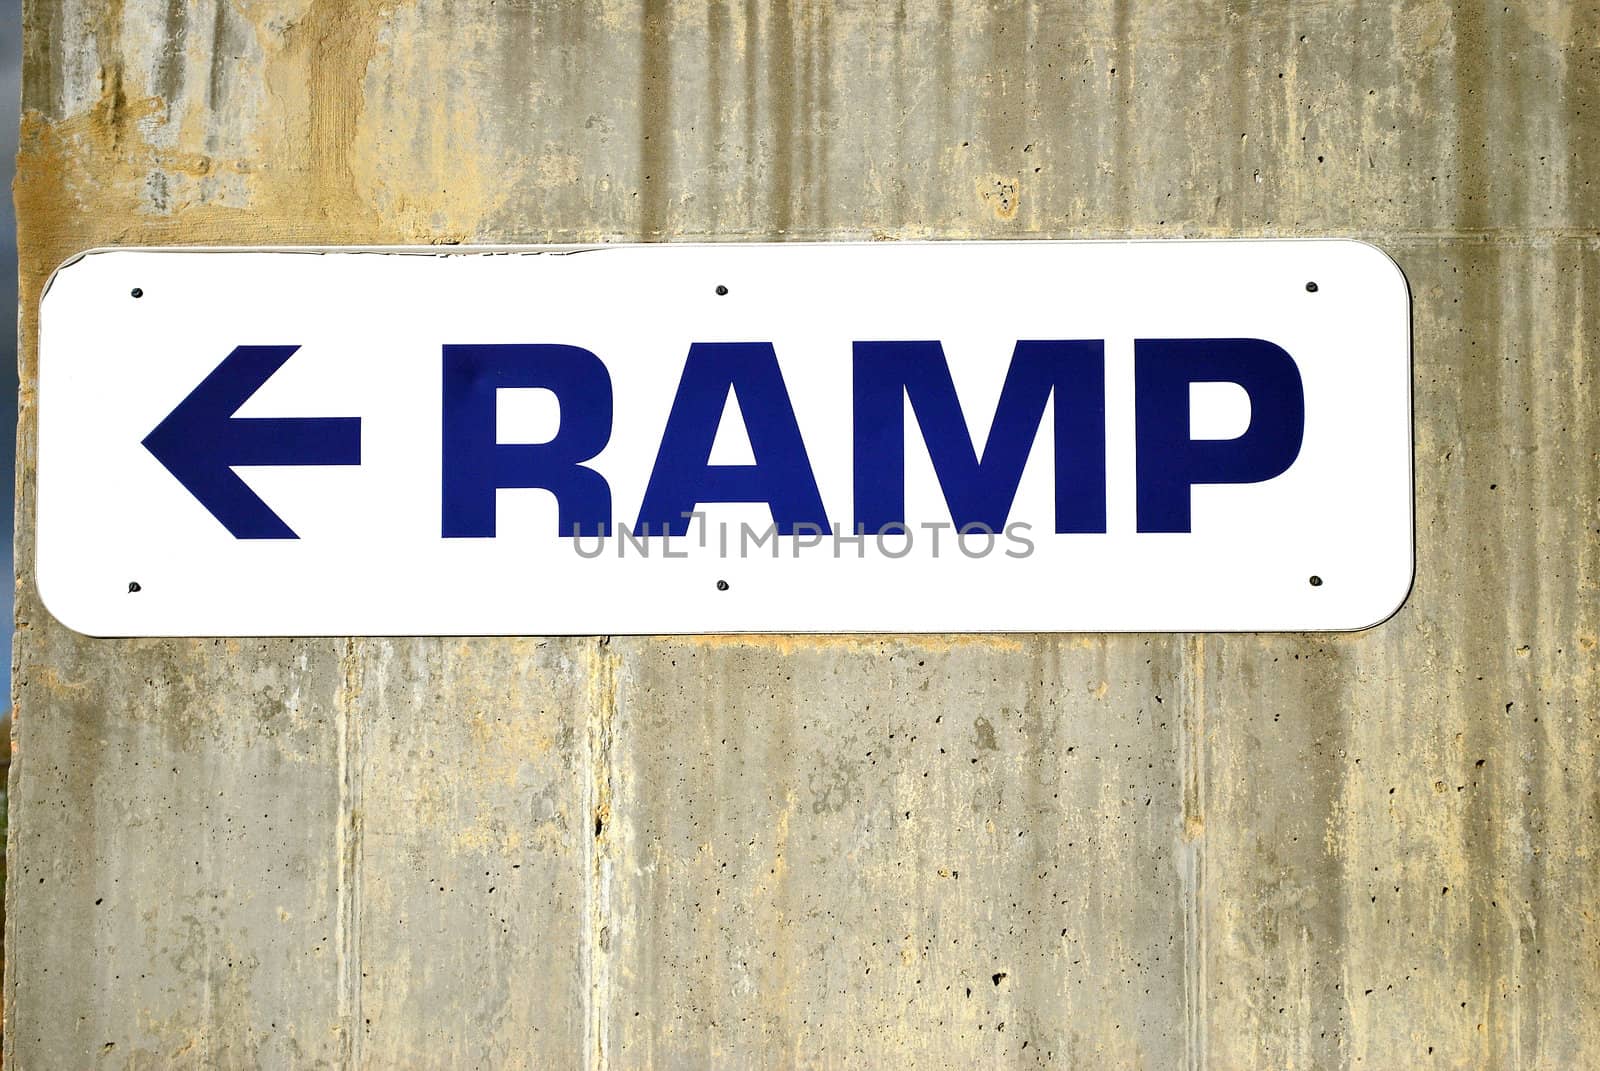 Ramp sign in front of a stadium.